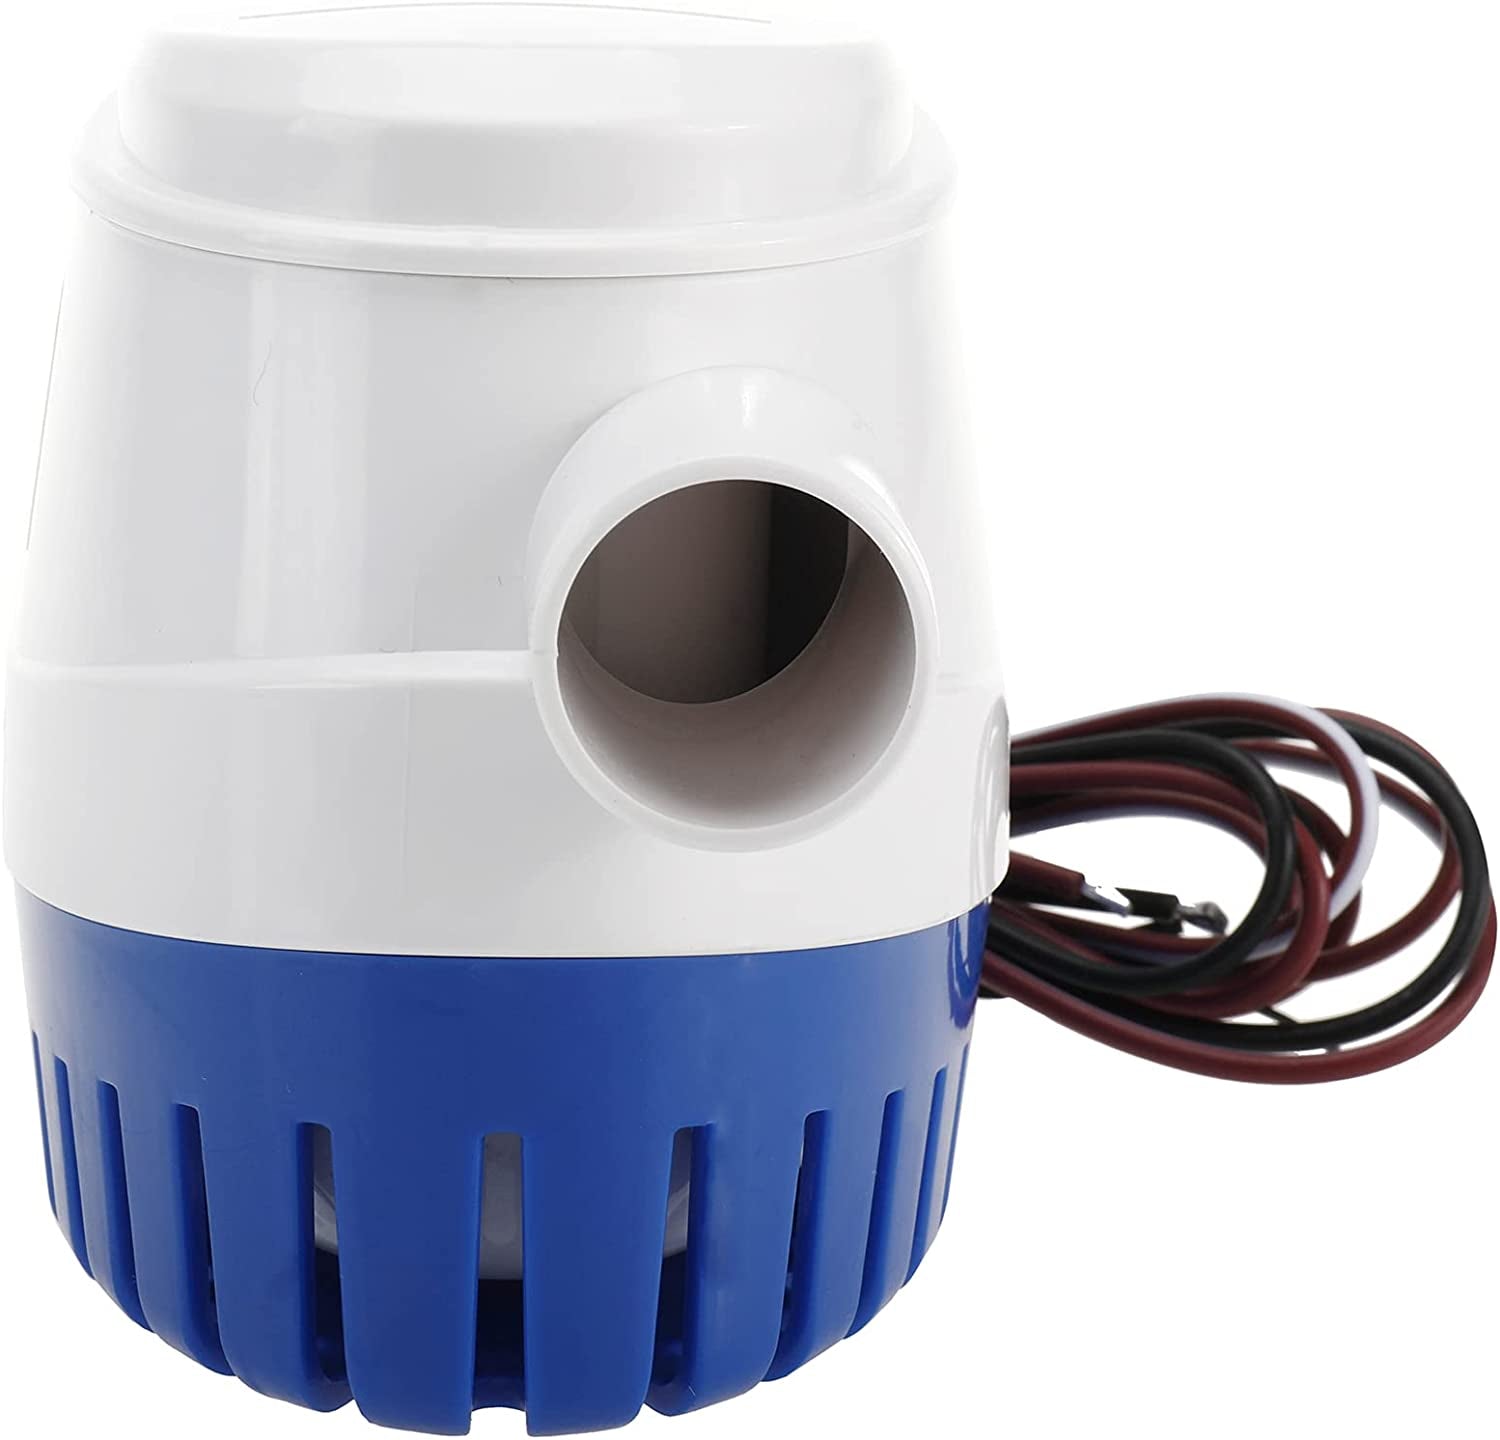 12V Automatic Submersible Boat Bilge Water Pump Built-In Auto Float Switch (760GPH)